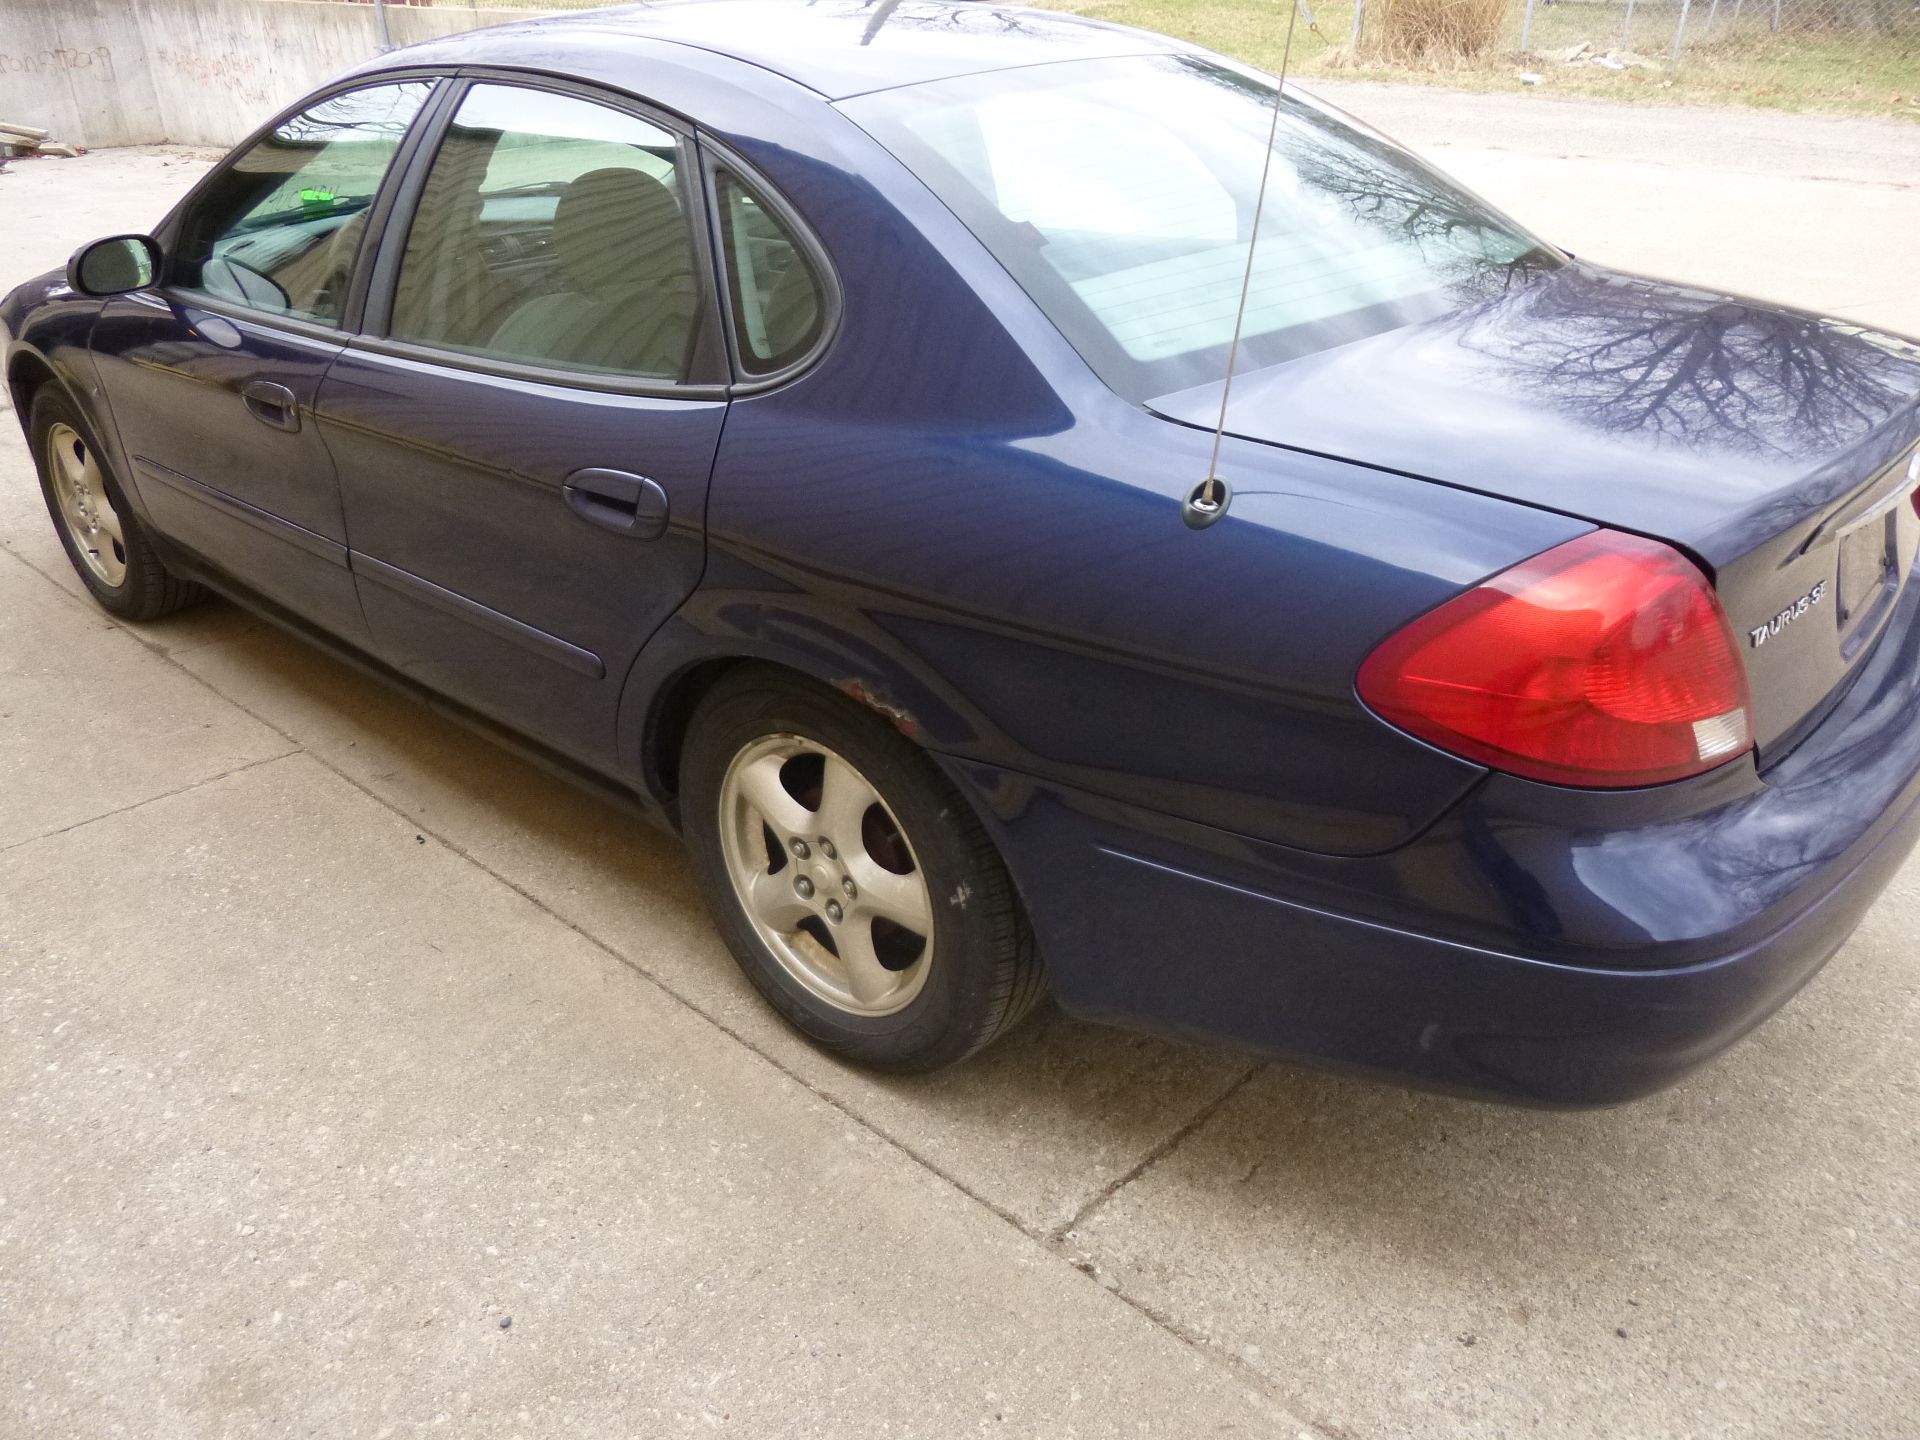 2002 Ford Taurus Municipally maintained Miles 92930 Vin # 1FAFP532X2G180779 CLEAR TITLE(located at - Image 7 of 12